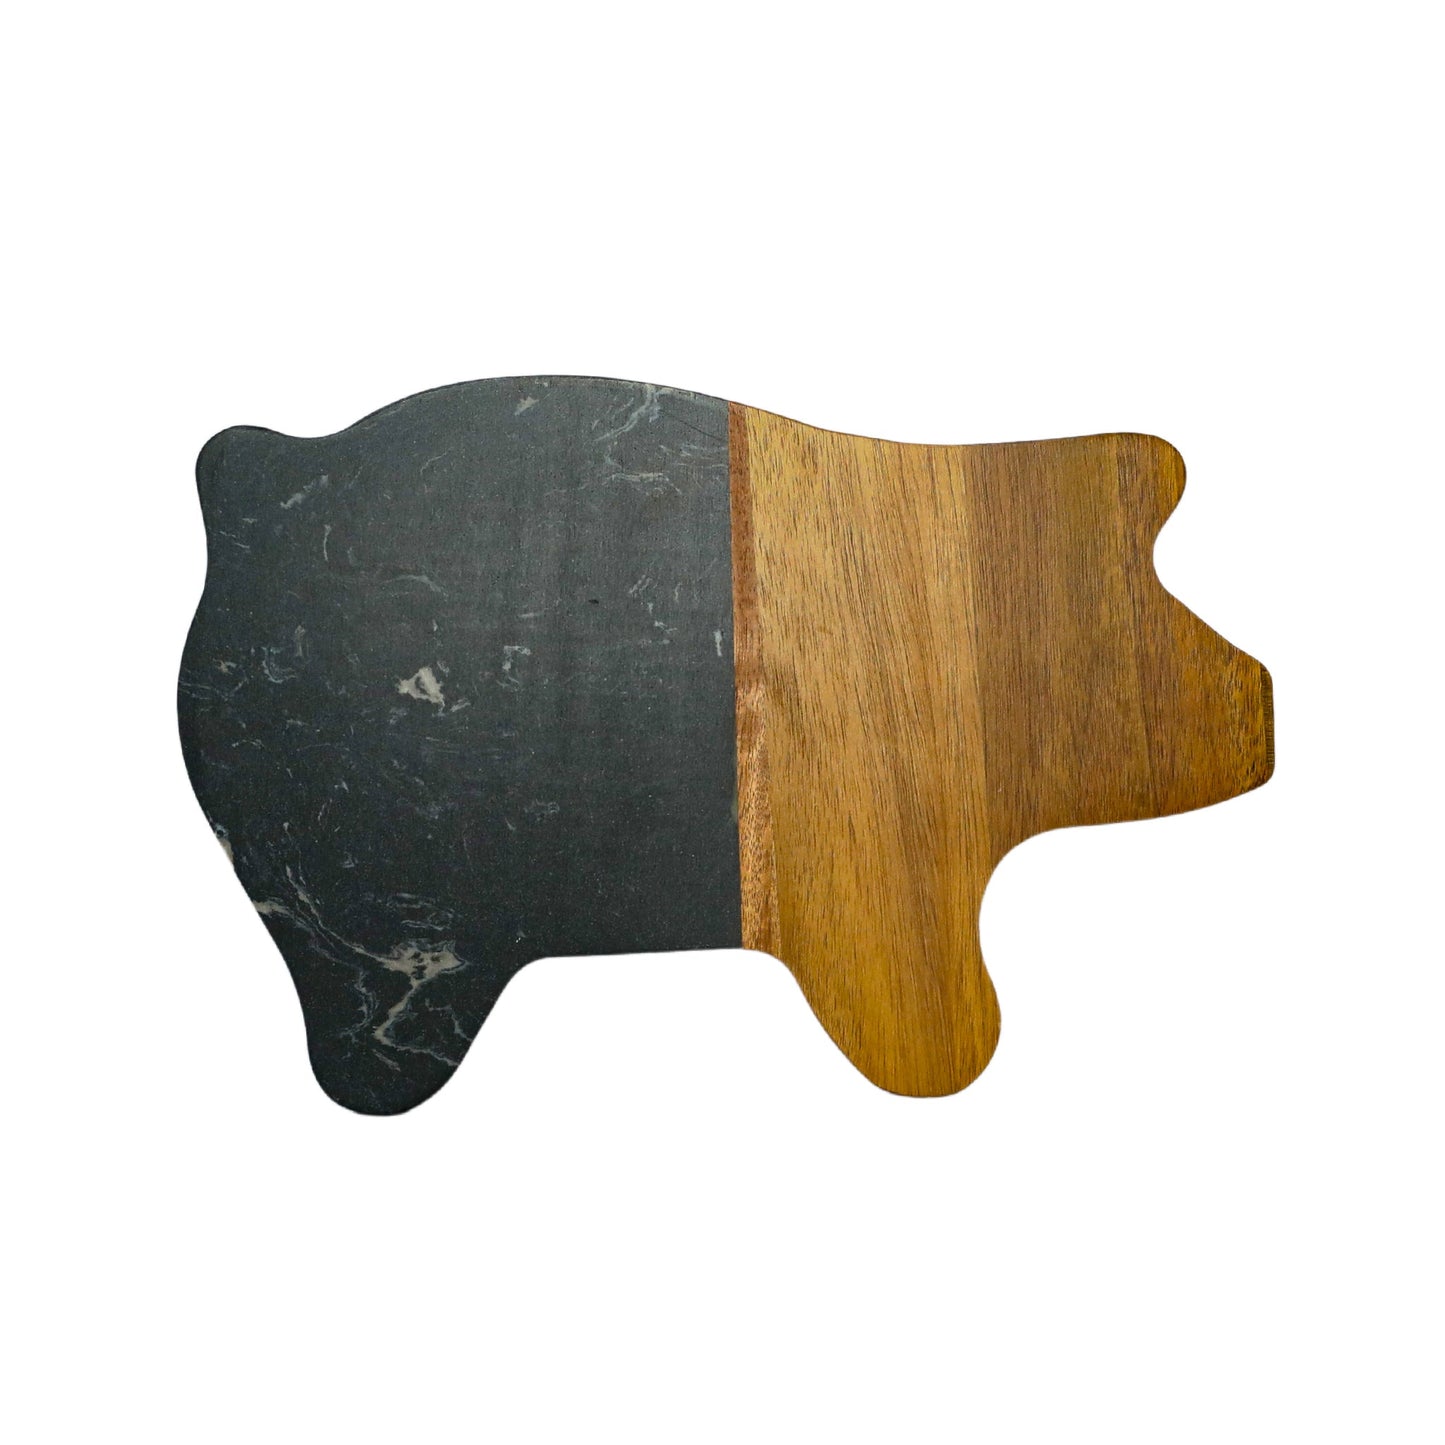 Black Marble and Acacia Wood Pig Board by Creative Gifts